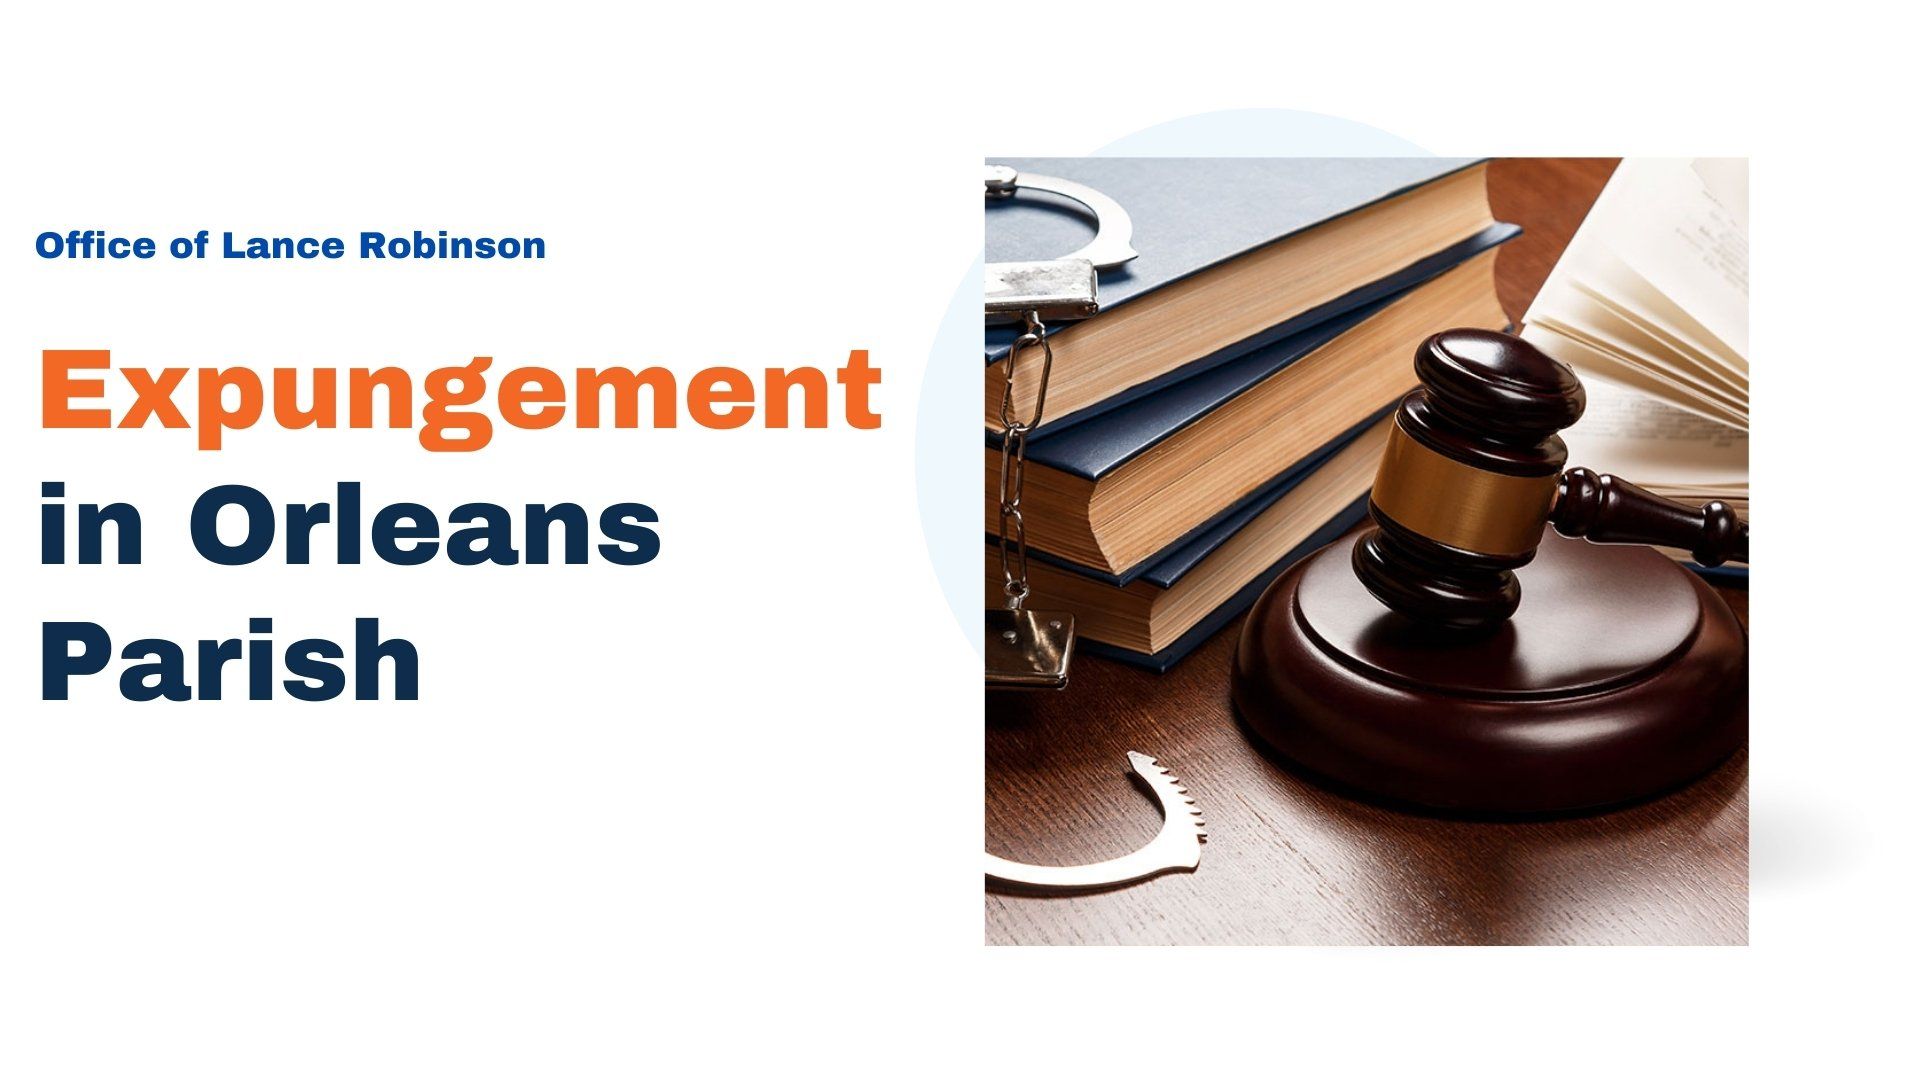 expungement in orleans parish office of lance robinson